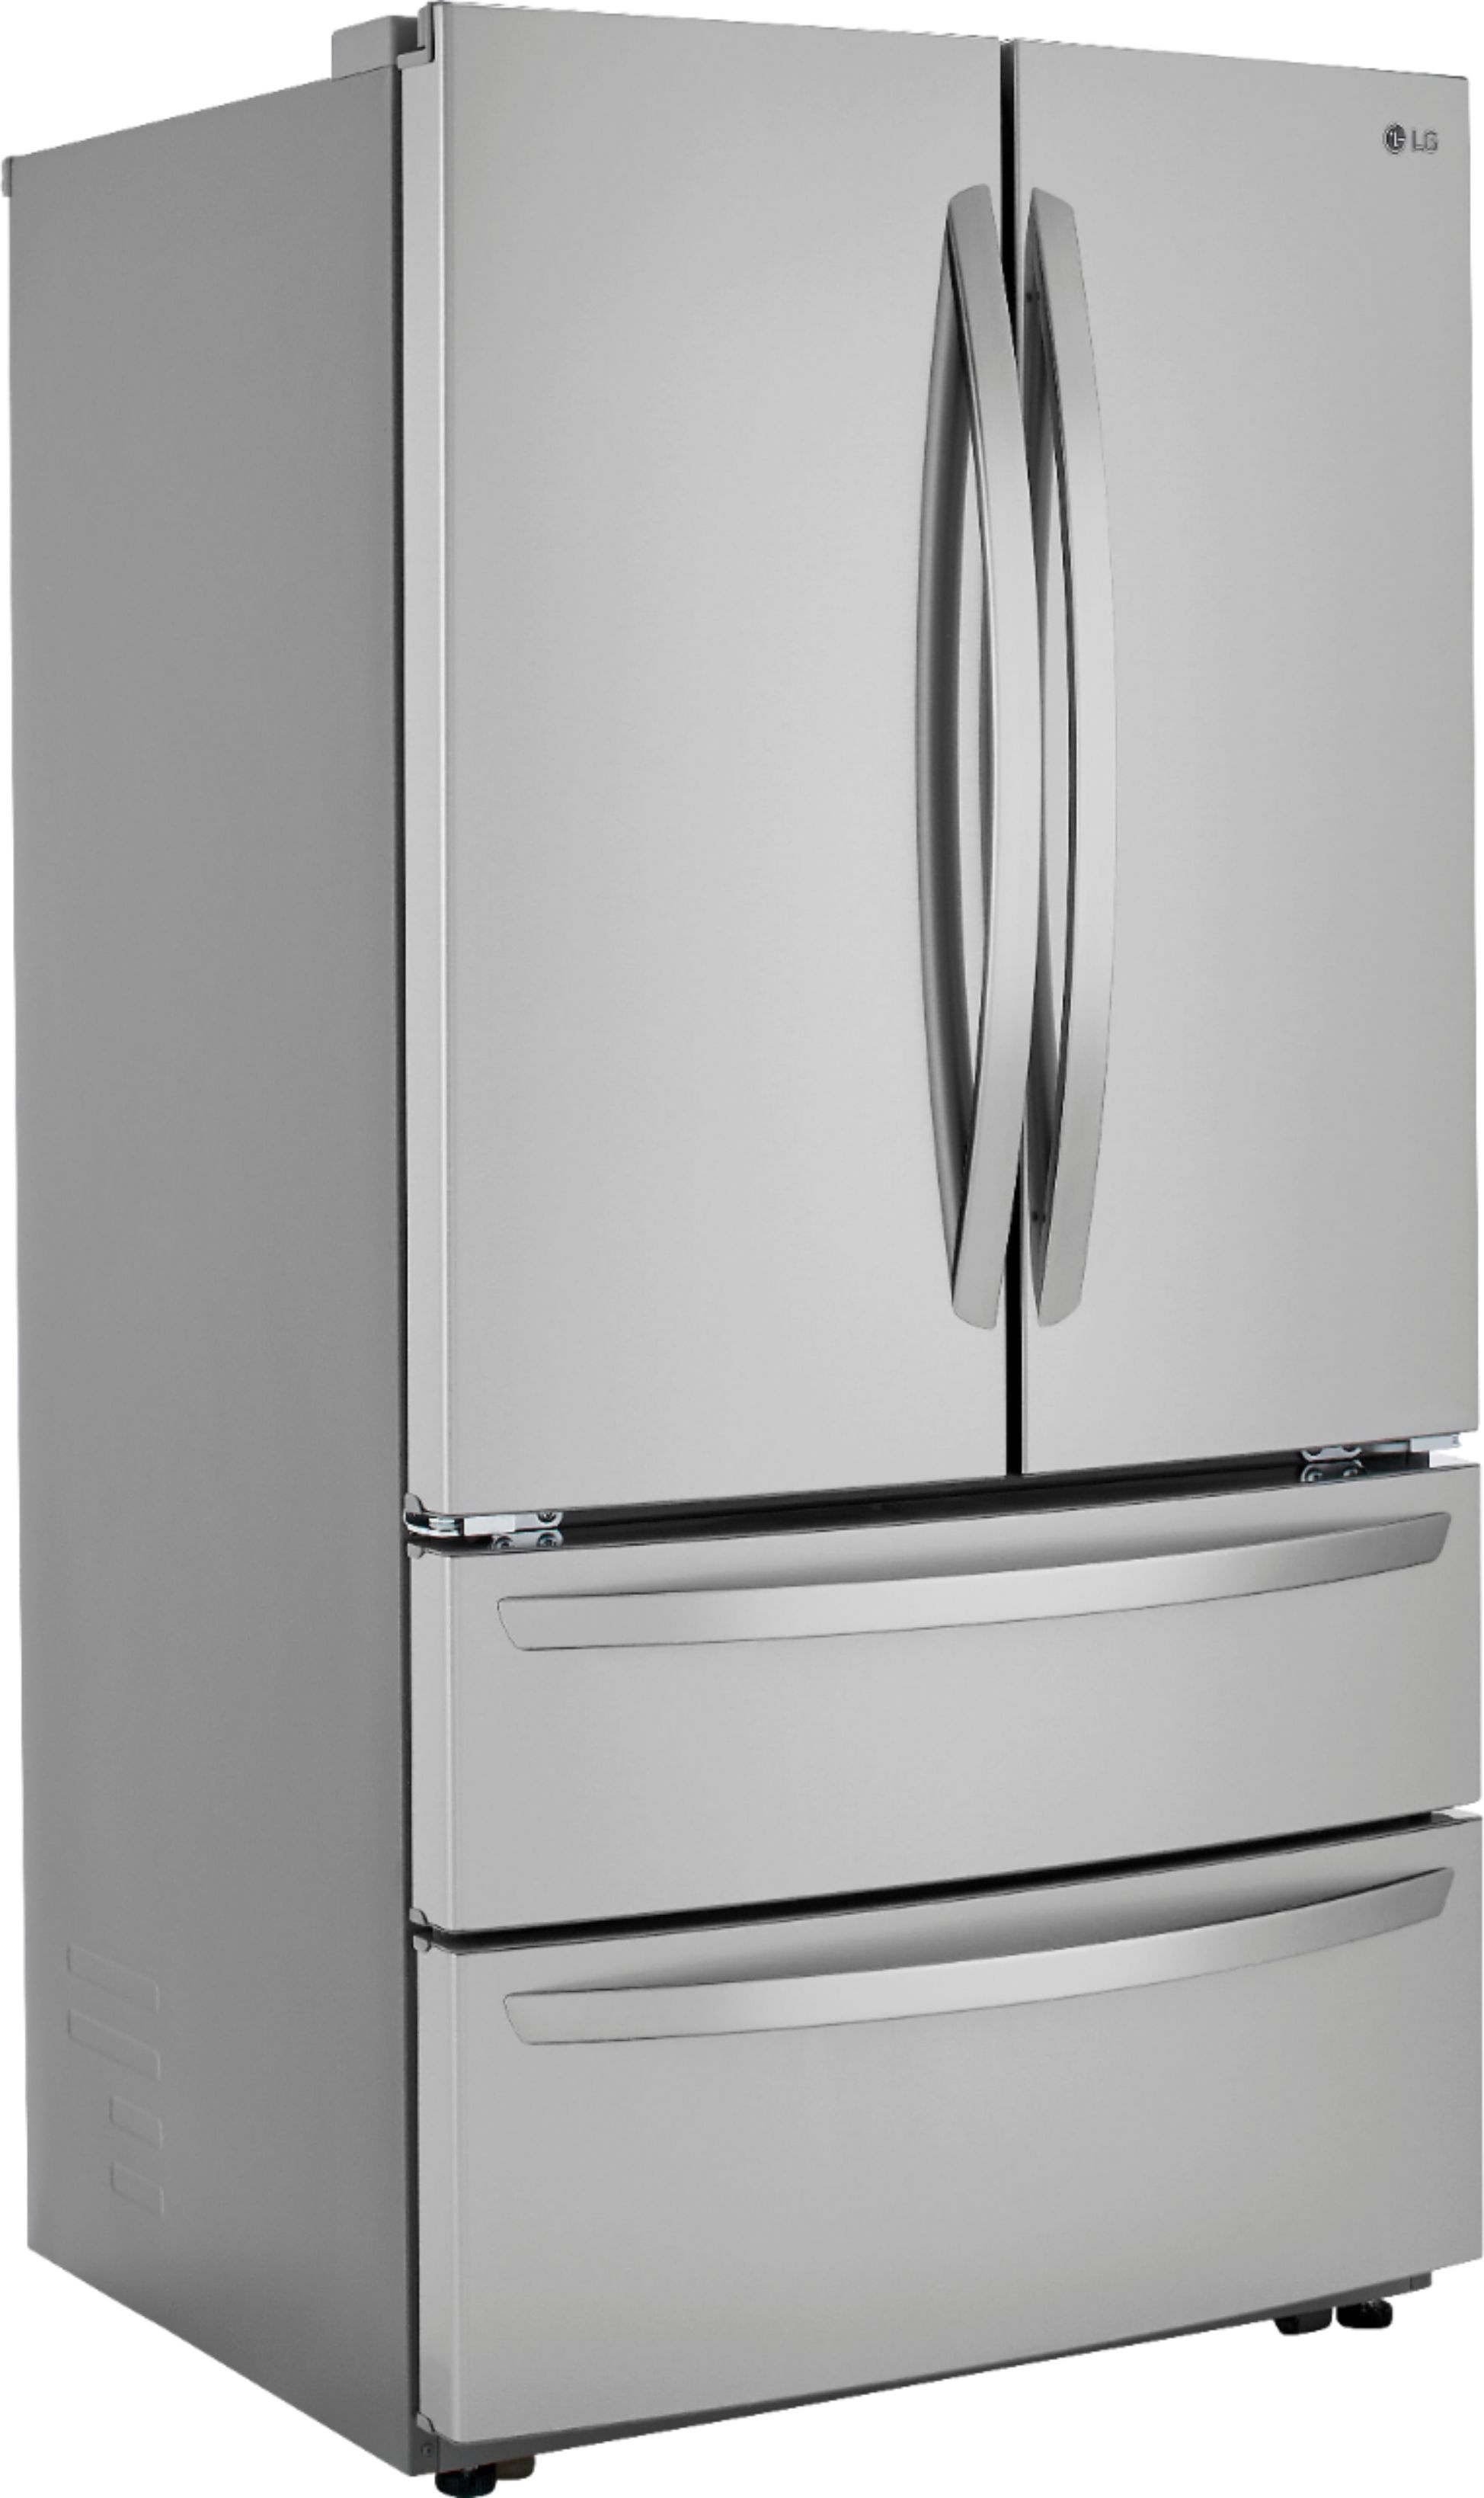 Angle View: LG - 26.9 Cu. Ft. 4-Door French Door Refrigerator with Internal Water Dispenser and Icemaker - Stainless steel